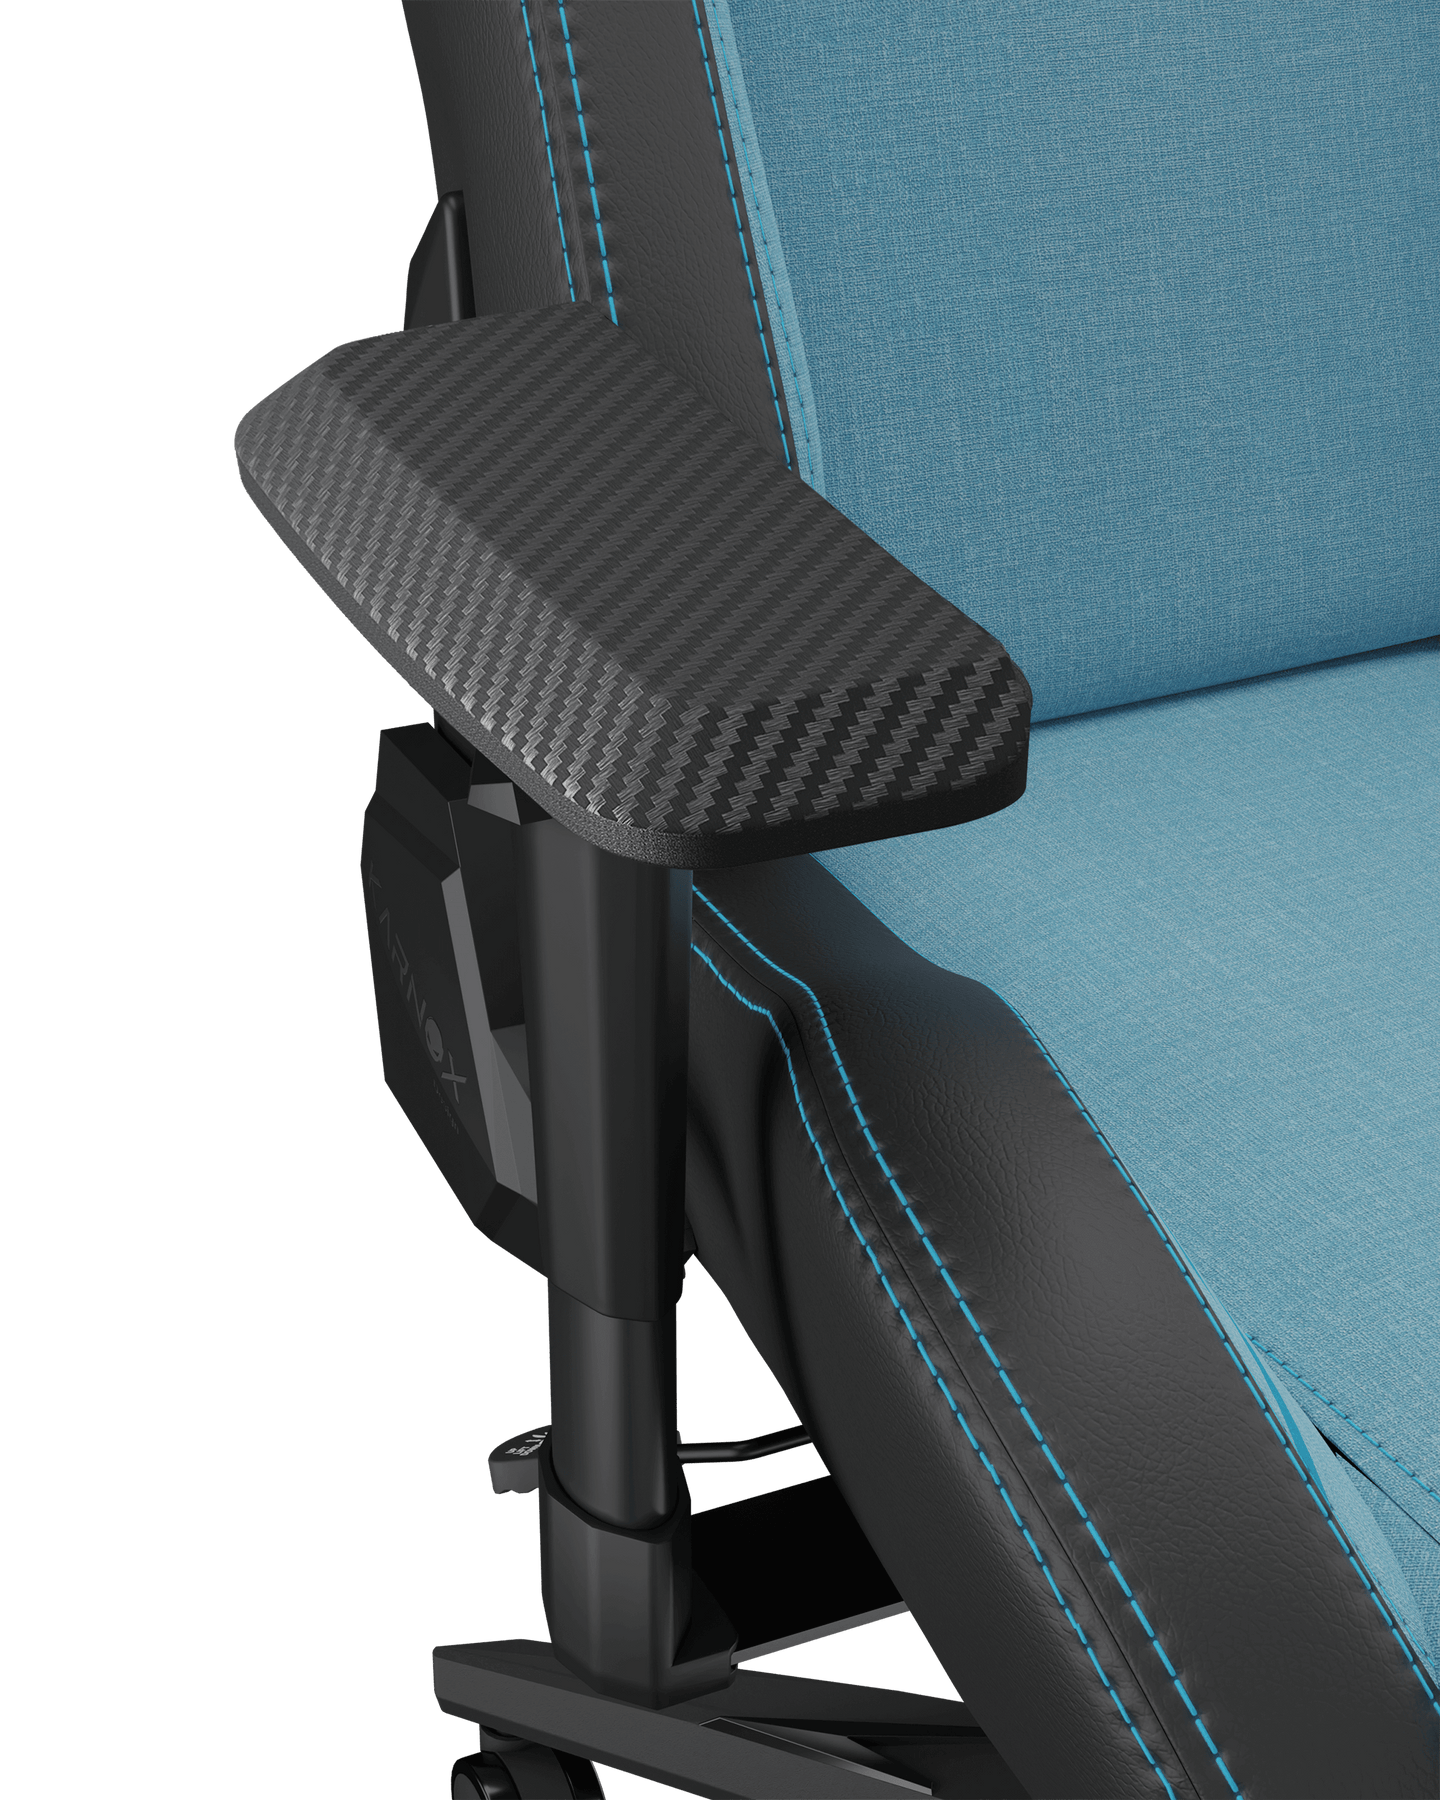 KARNOX Genie Game Chair Office Chair Ergonomic Computer Game Chair with  Lumbar Support and Adjustable Headrest Pillow PC Gaming Chair Cloth for  Teens